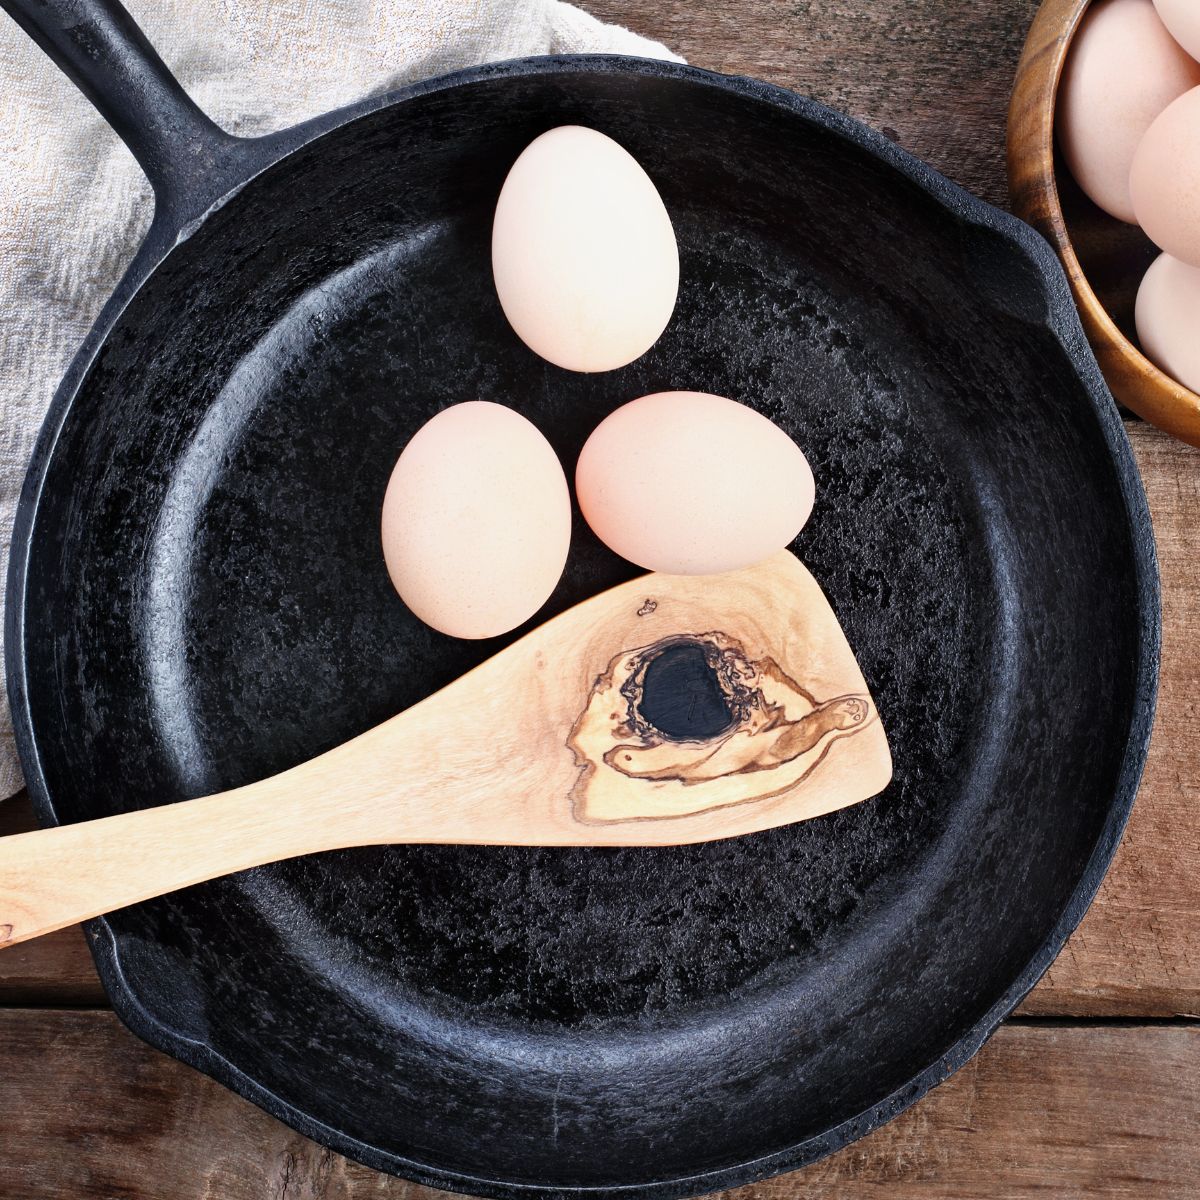 Three whole eggs and a wooden spoon in a cast iron skillet, set on a recipe index.